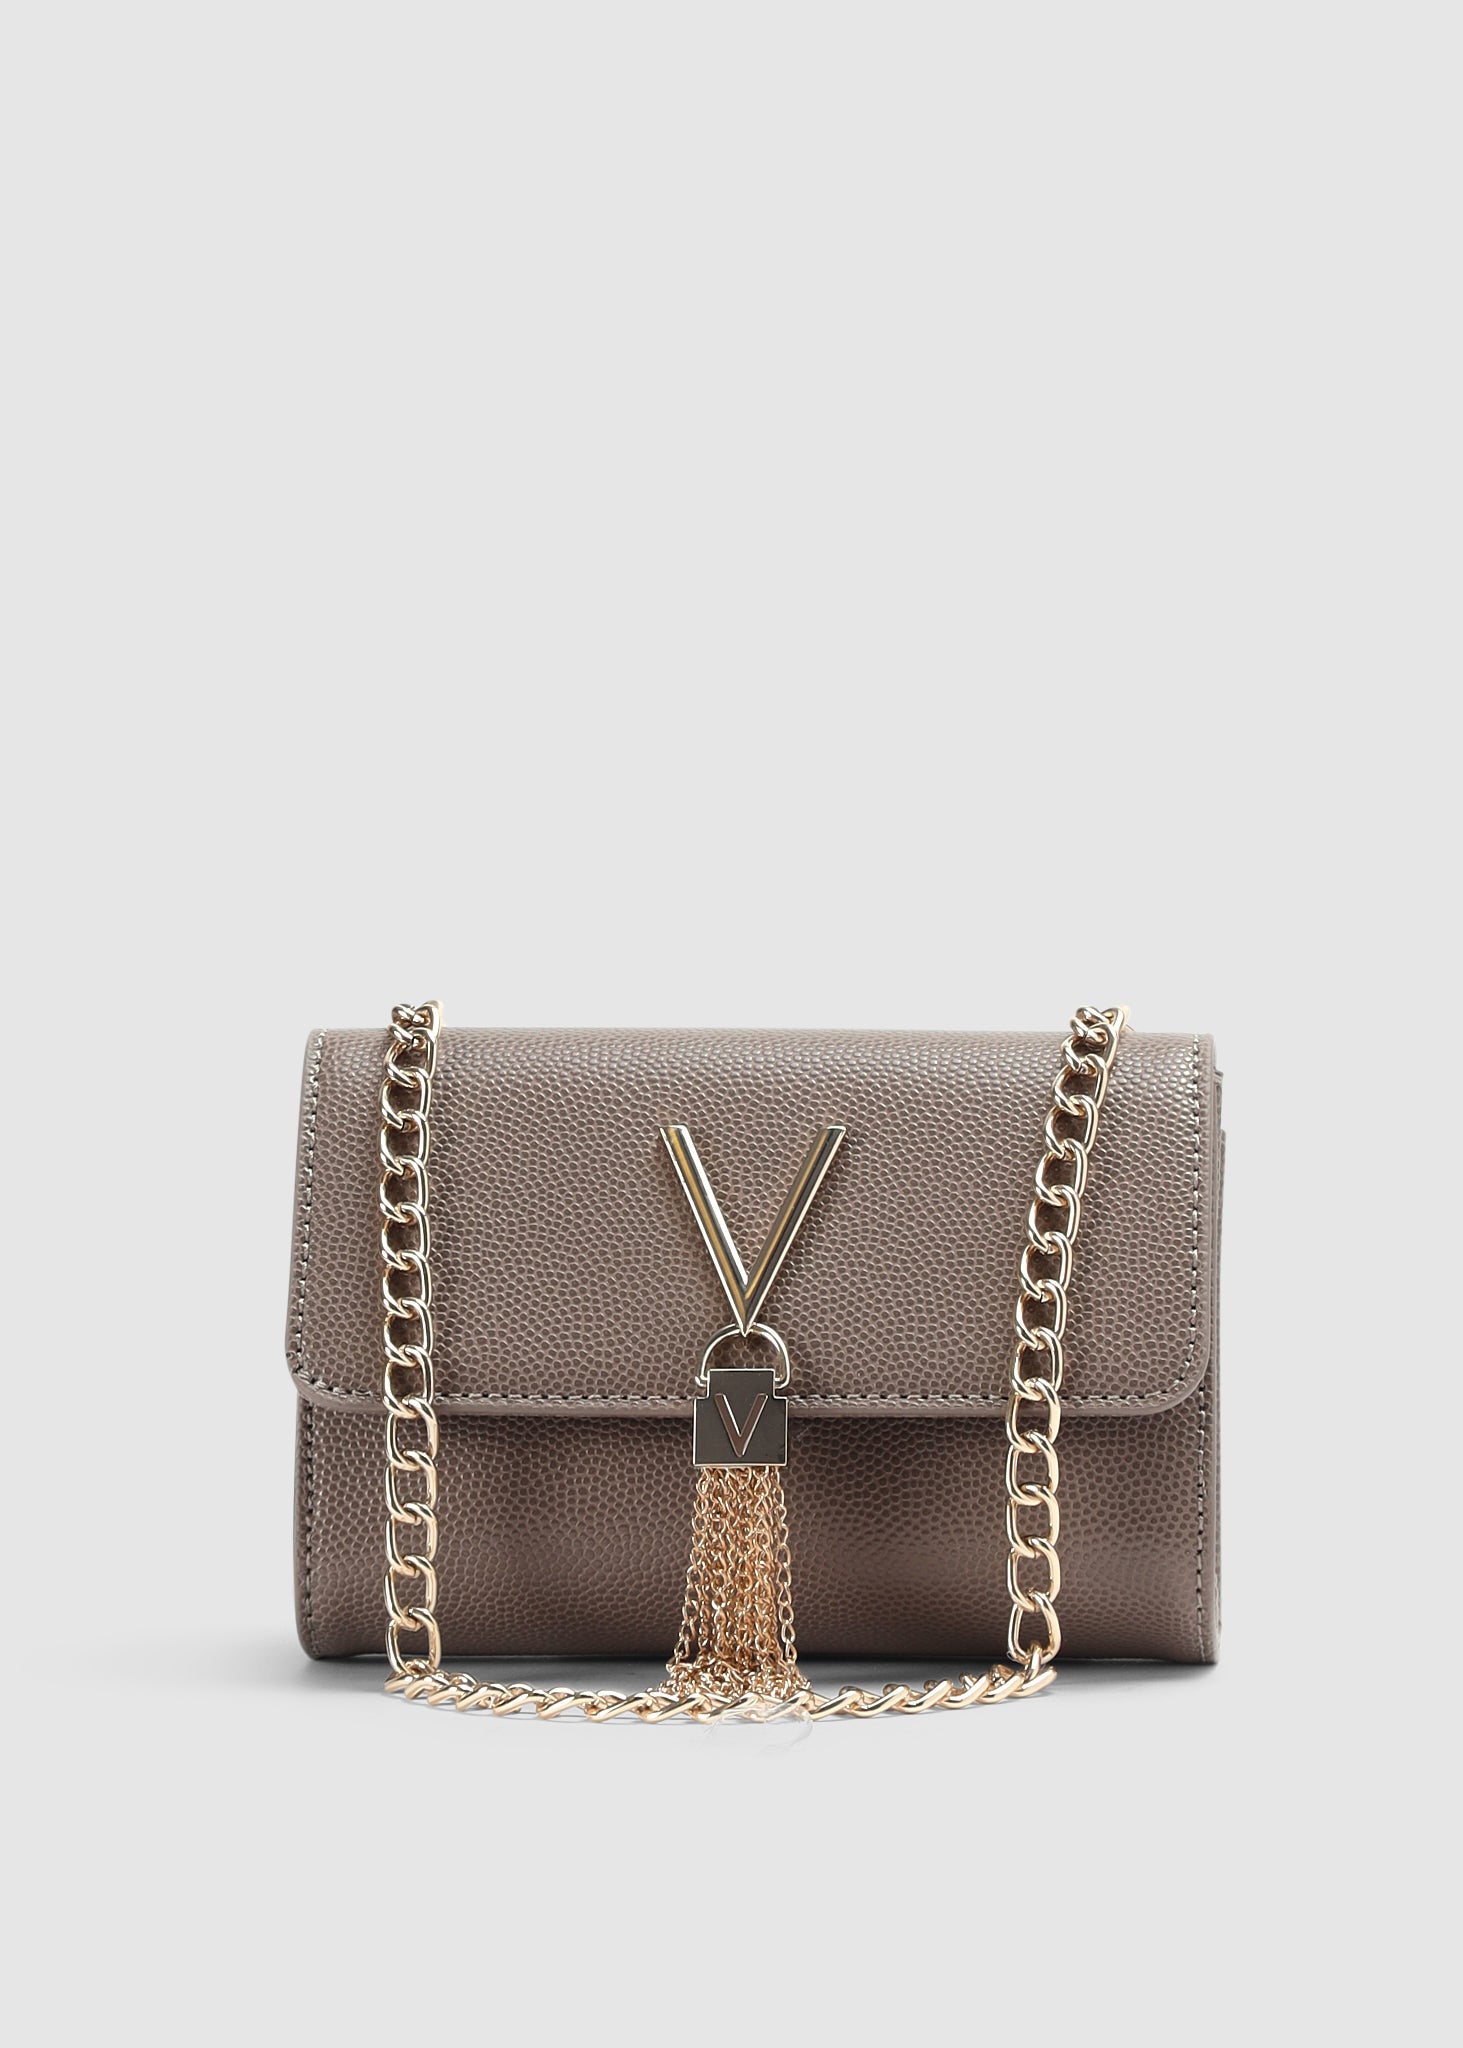 Valentino Bags Womens Divina Bag In Taupe